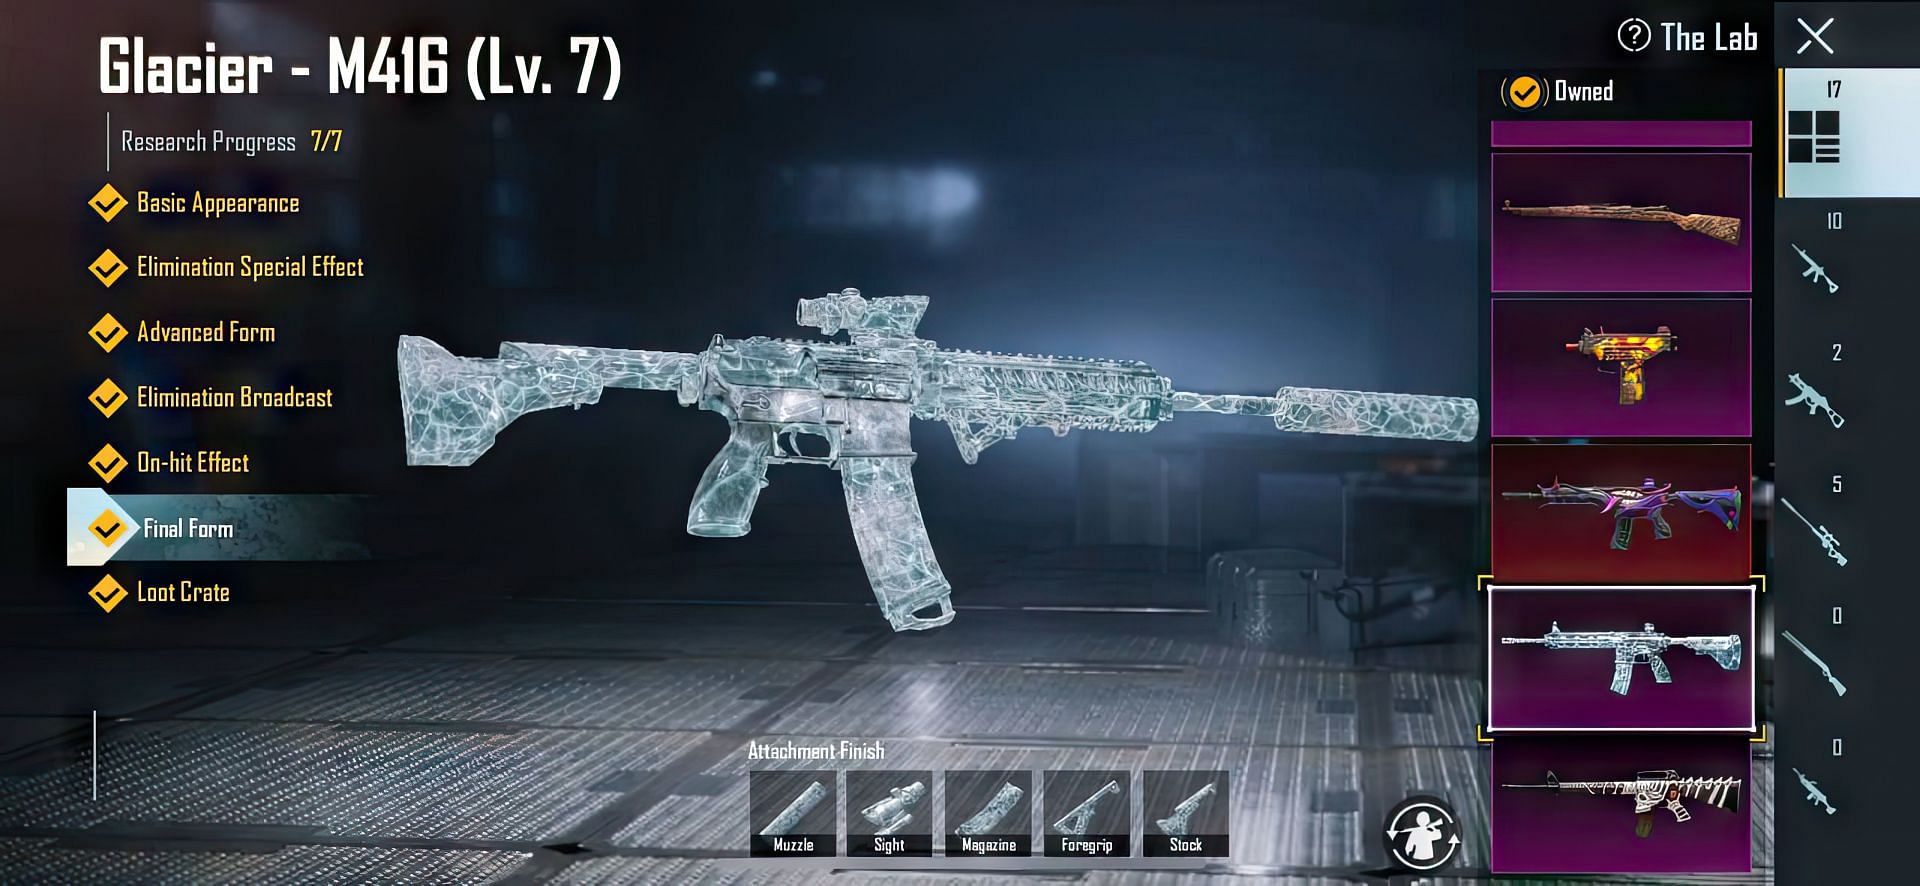 A fully iced out M416 Glacier